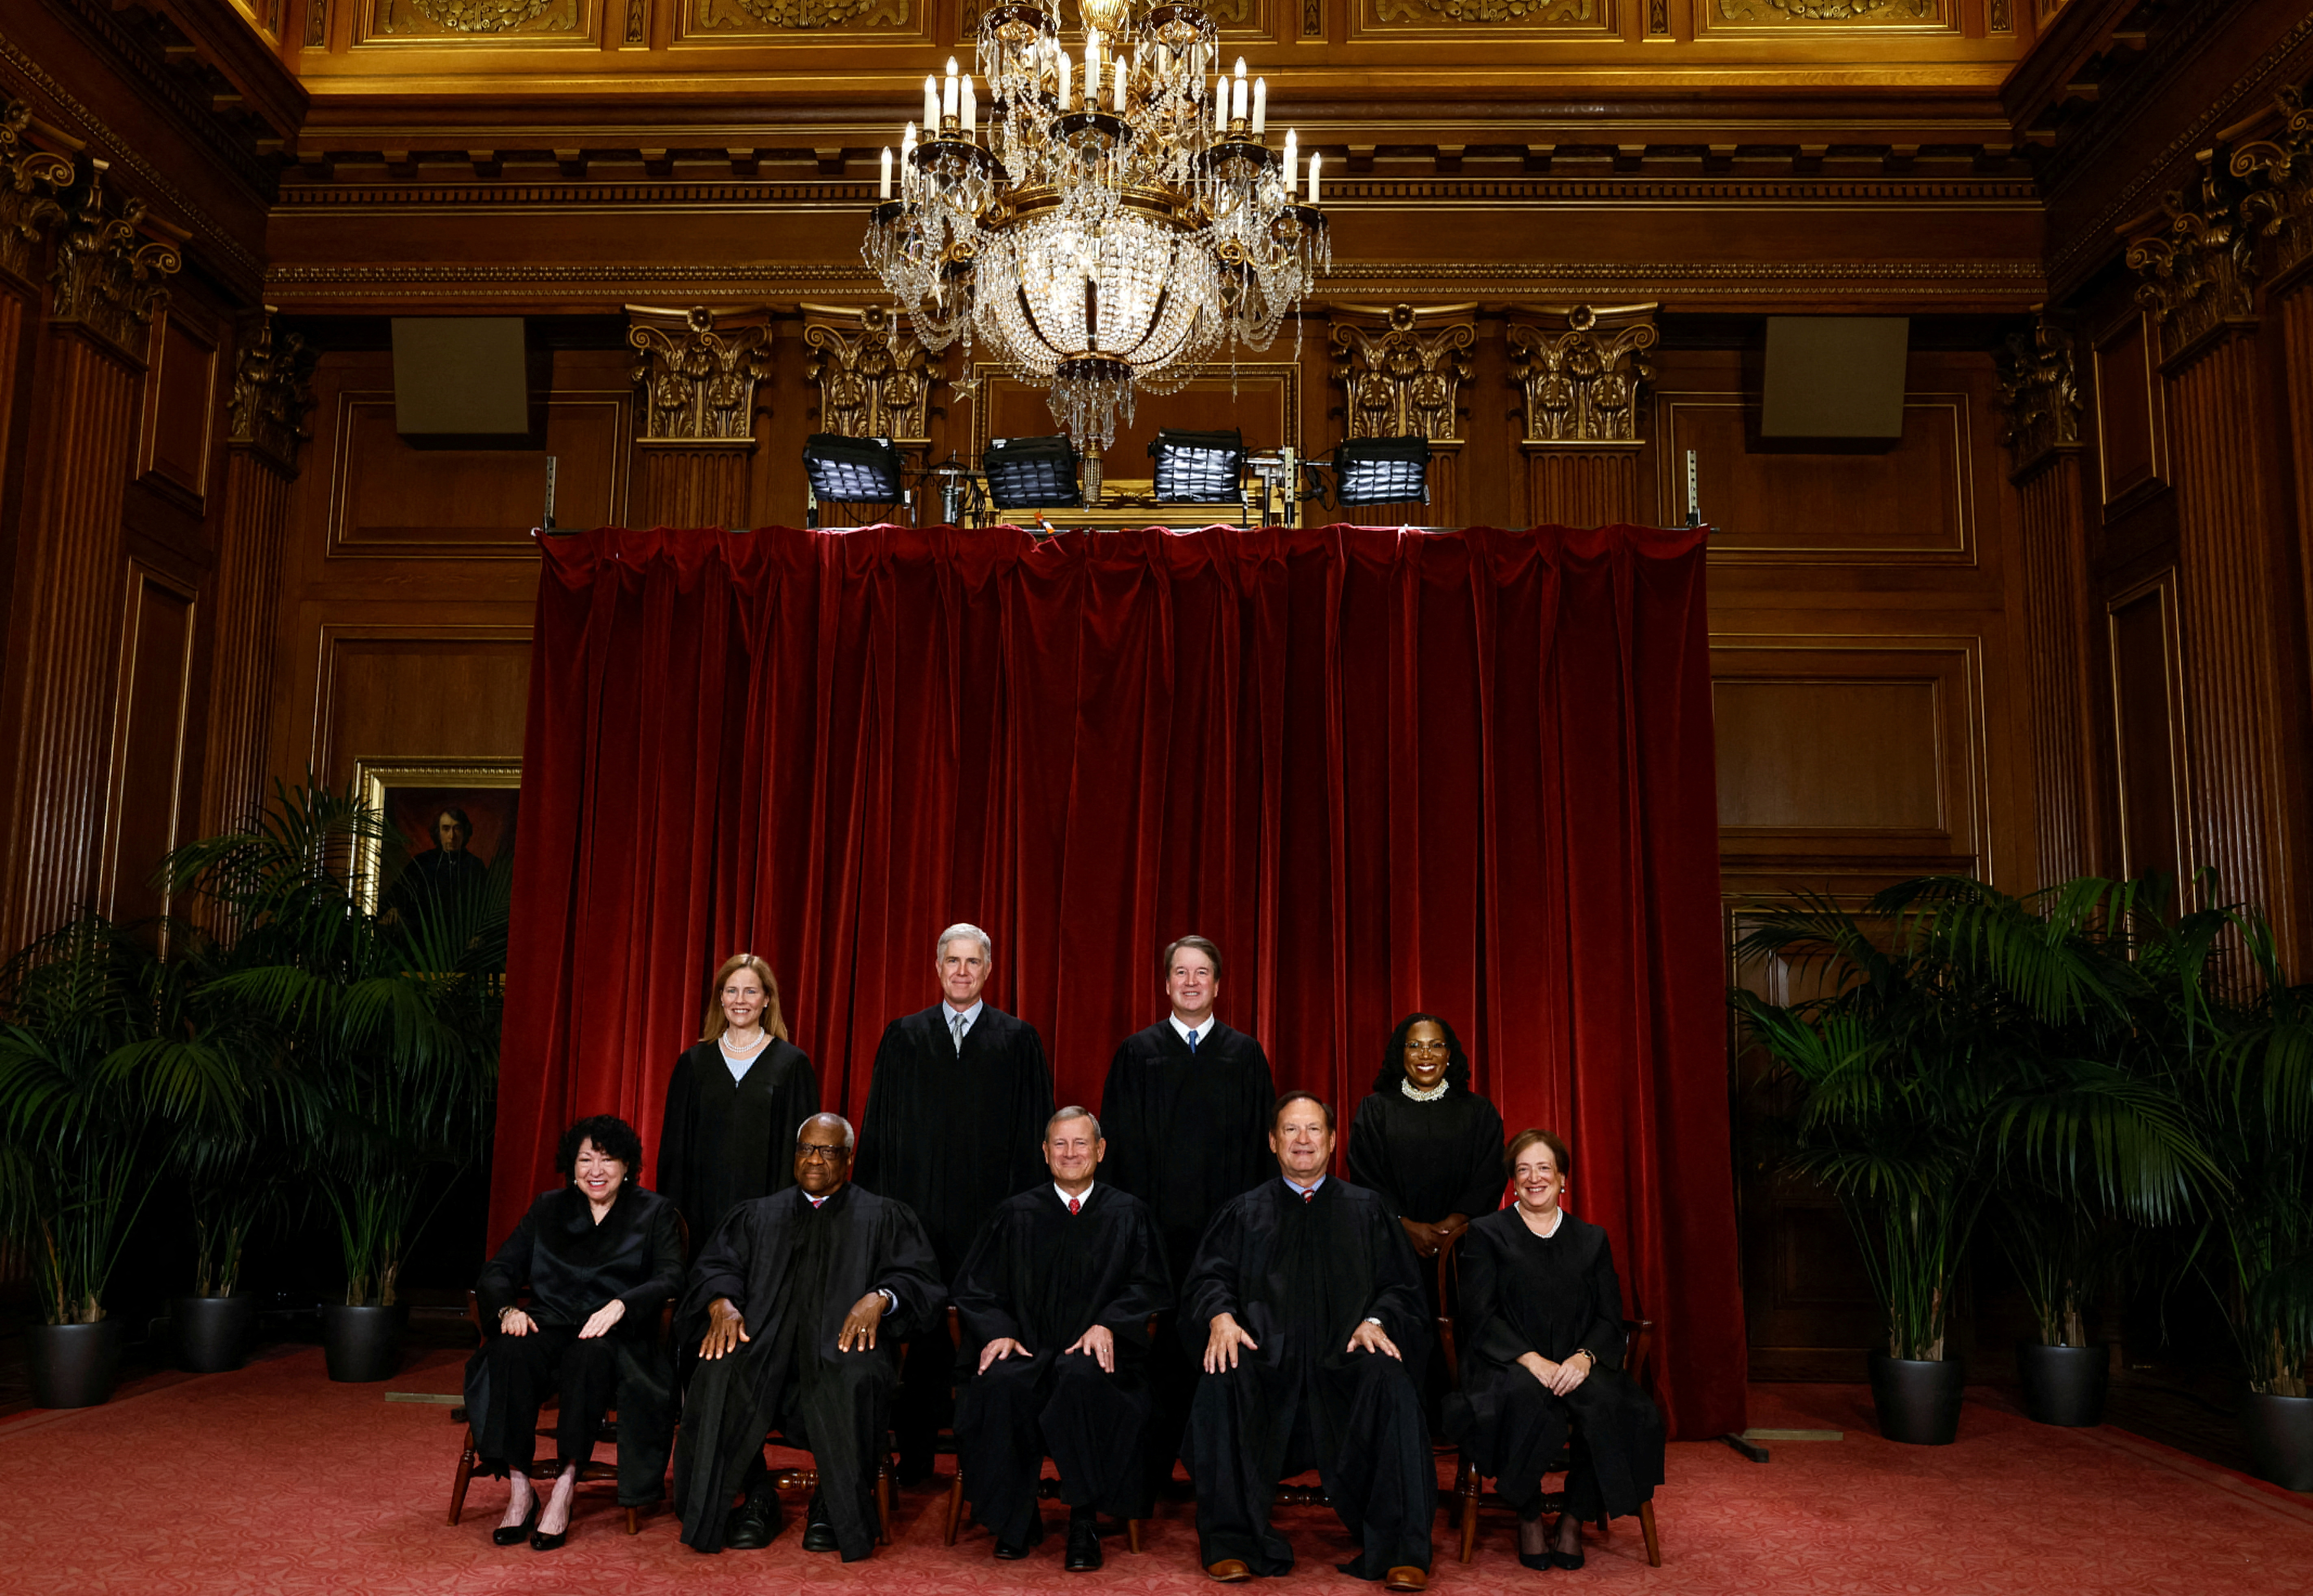 U.S. Supreme Court justices pose for their group portrait at the Supreme Court in Washington